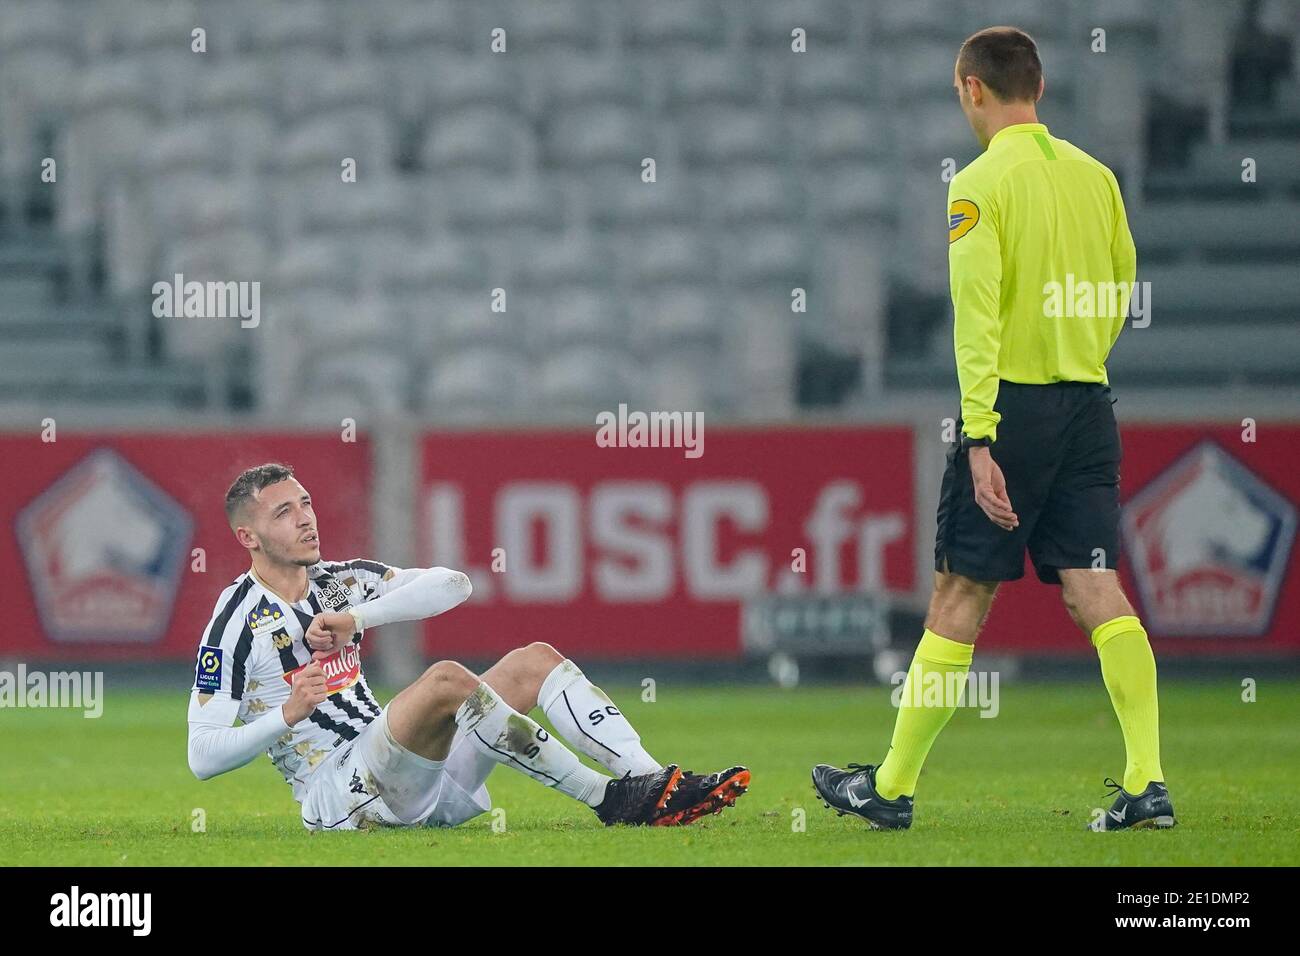 LILLE, FRANCE - JANUARY 6: Mathias Pereira Lage of Angers SCO injured, referee Thomas Leonard during the Ligue 1 match between Lille OSC and Angers SCO at Stade Pierre Mauroy on January 6, 2021 in Lille, France (Photo by Jeroen Meuwsen/BSR Agency/Alamy Live News)*** Local Caption *** Mathias Pereira Lage injured, Thomas Leonard Stock Photo